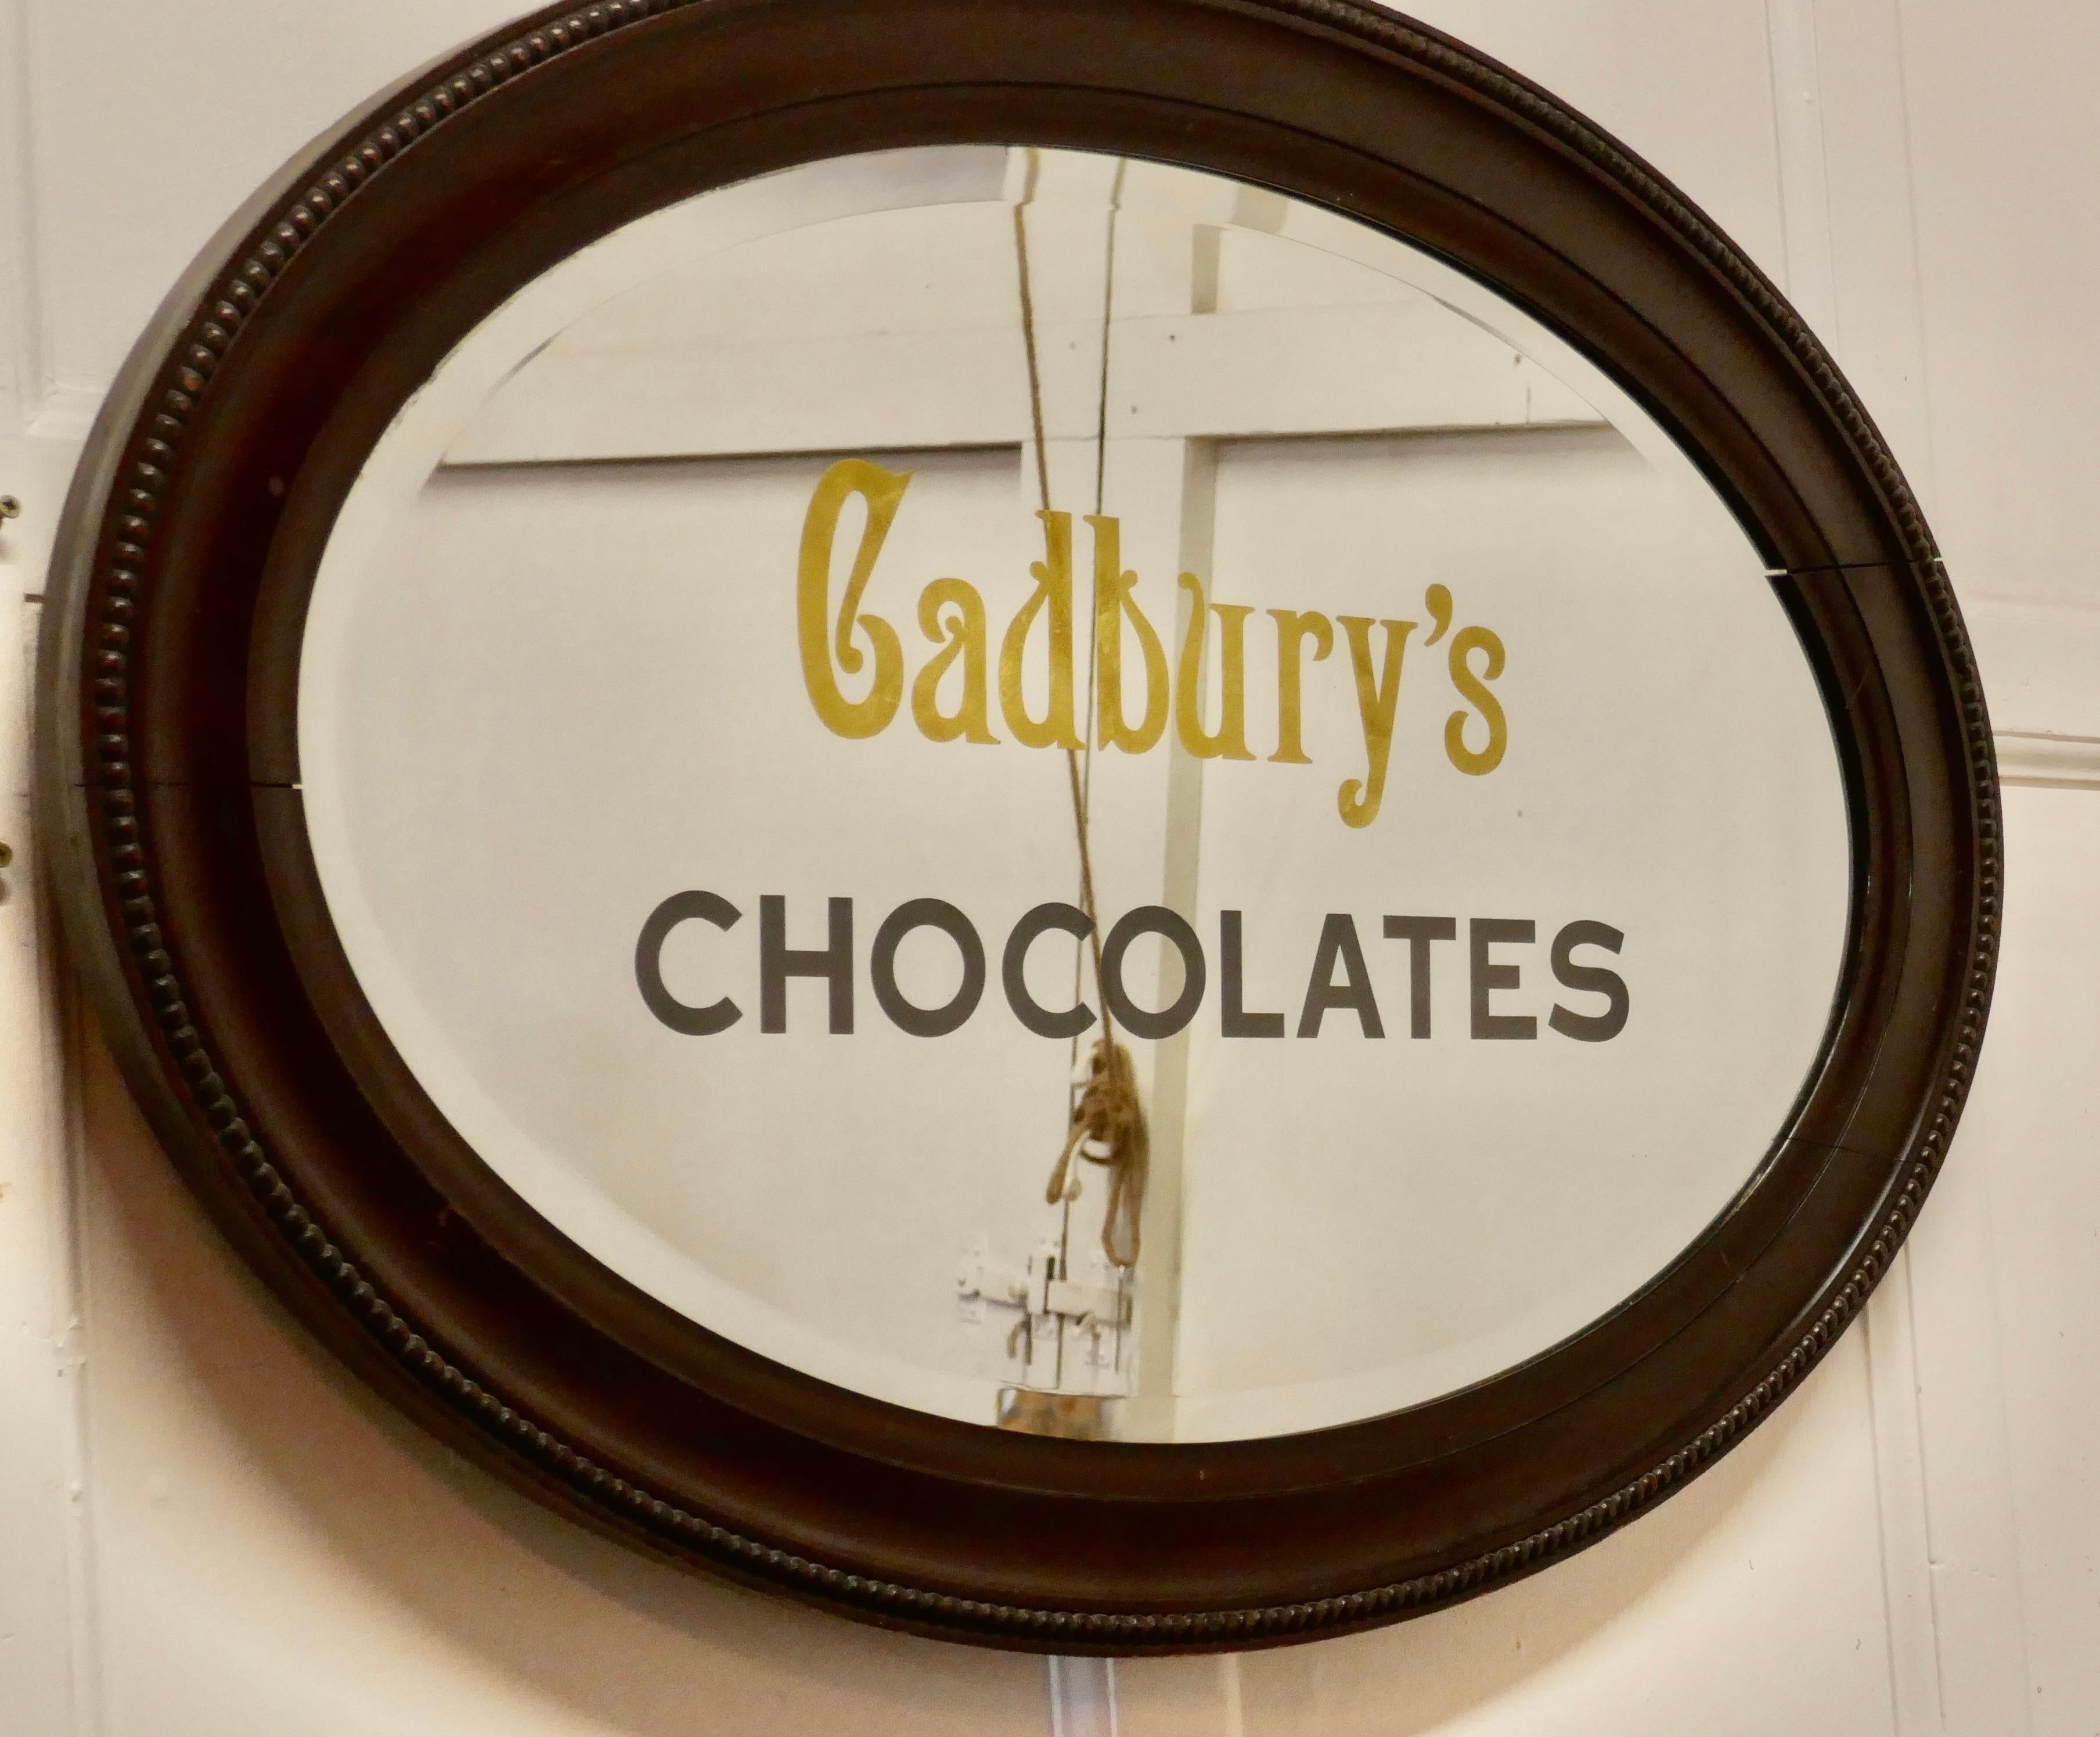 Edwardian Cadbury’s Chocolates Advertising Mirror In Good Condition For Sale In Chillerton, Isle of Wight